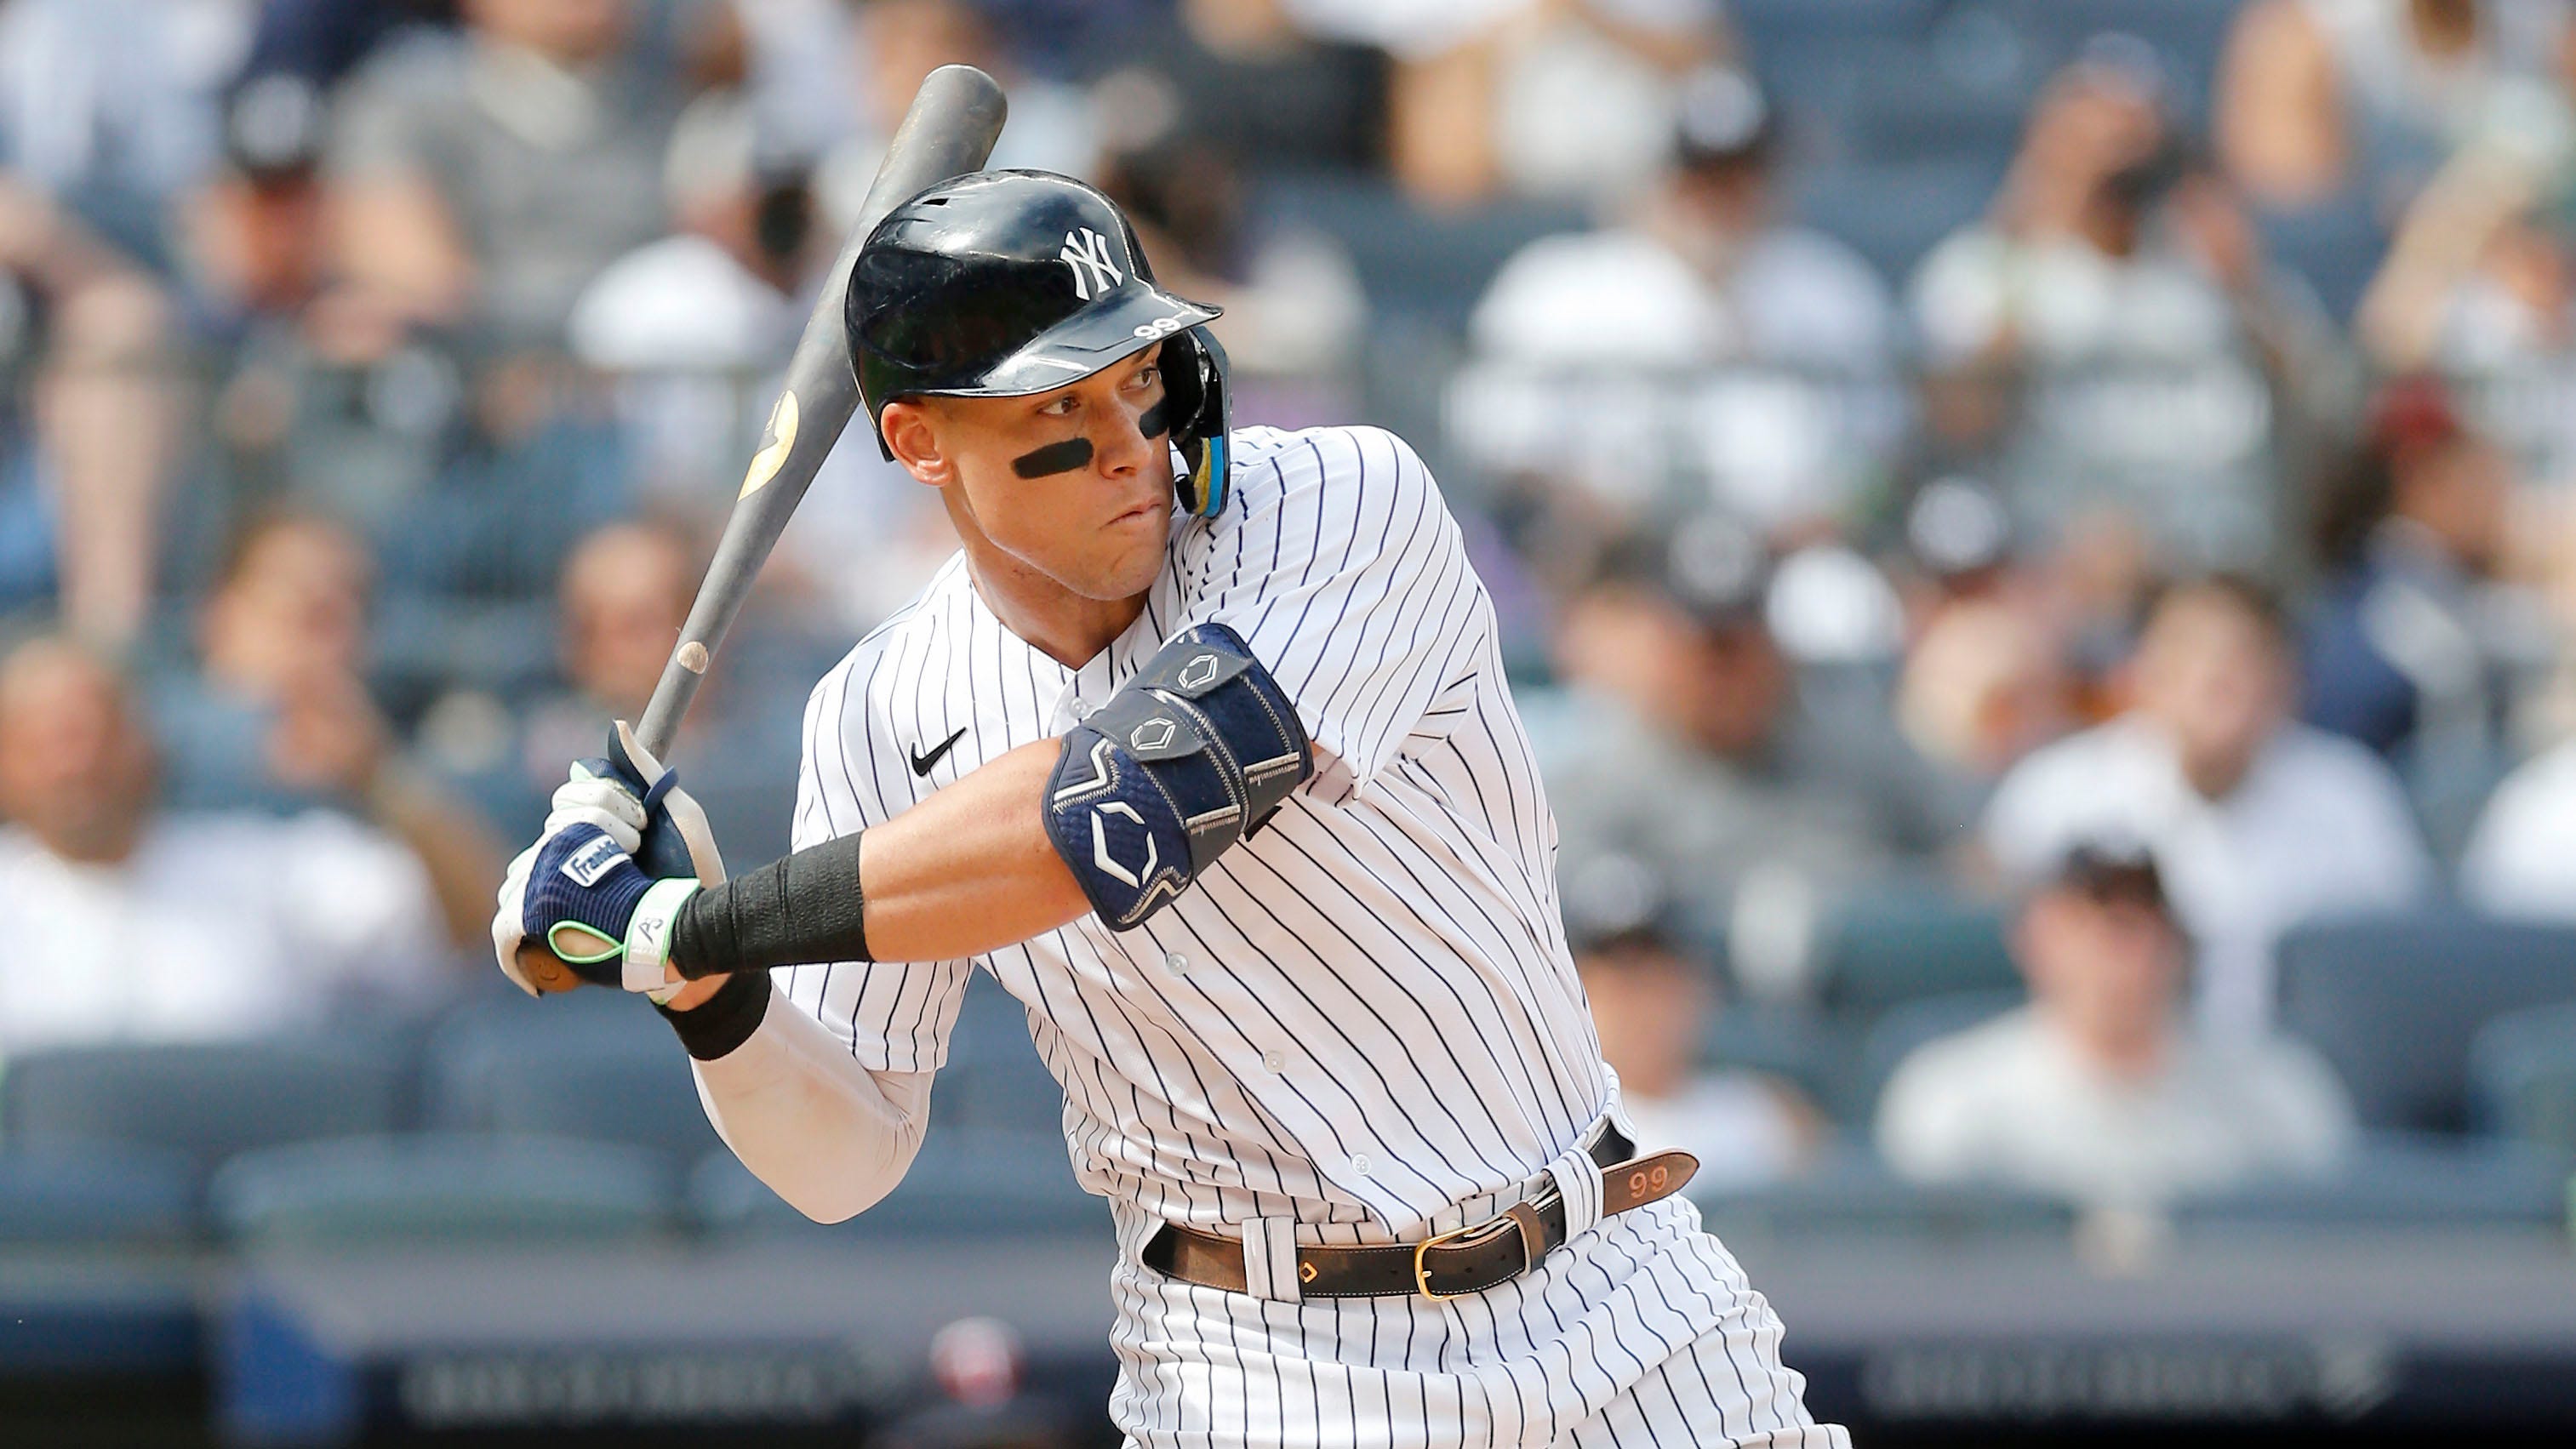 Aaron Judge rewrites Yankees' record books with 55th home run